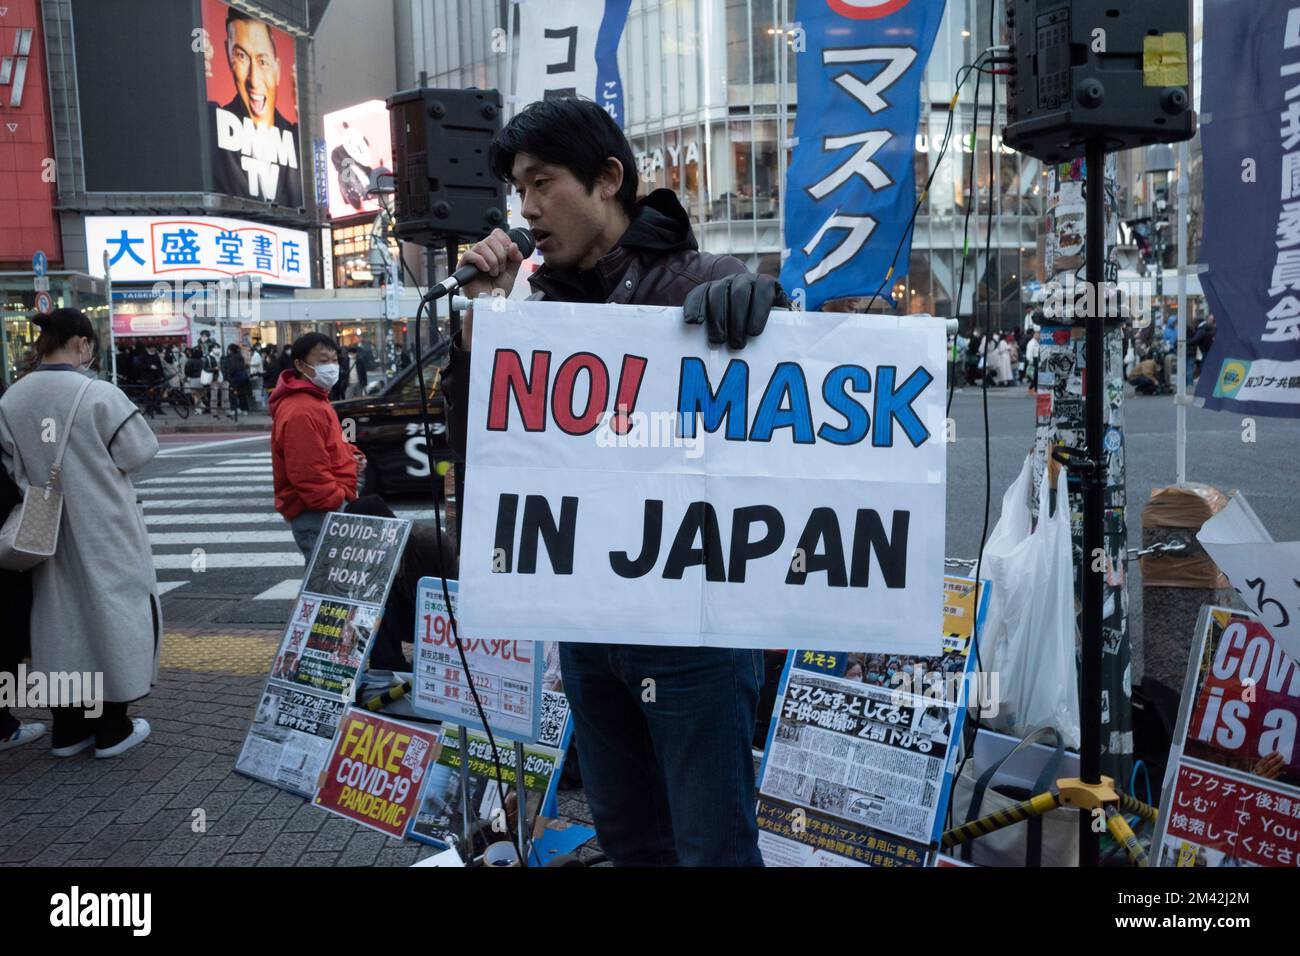 Tokyo, Japan. 18th Dec, 2022. Anti-Mask protesters hold a demonstration at a corner along the Shibuya Scramble pedestrian intersection trying to convince locals and tourists to not wear masks. Despite not having any government public health mandate requiring masks, most Japanese residents have continued to wear masks in public throughout the entire COVID-19 pandemic and continue to do so today. The demonstrators insist the virus is not as deadly as its put out to be by the media and insist the response to the pandemic is a hoax to exert control over the general public.Japan has recently r Stock Photo